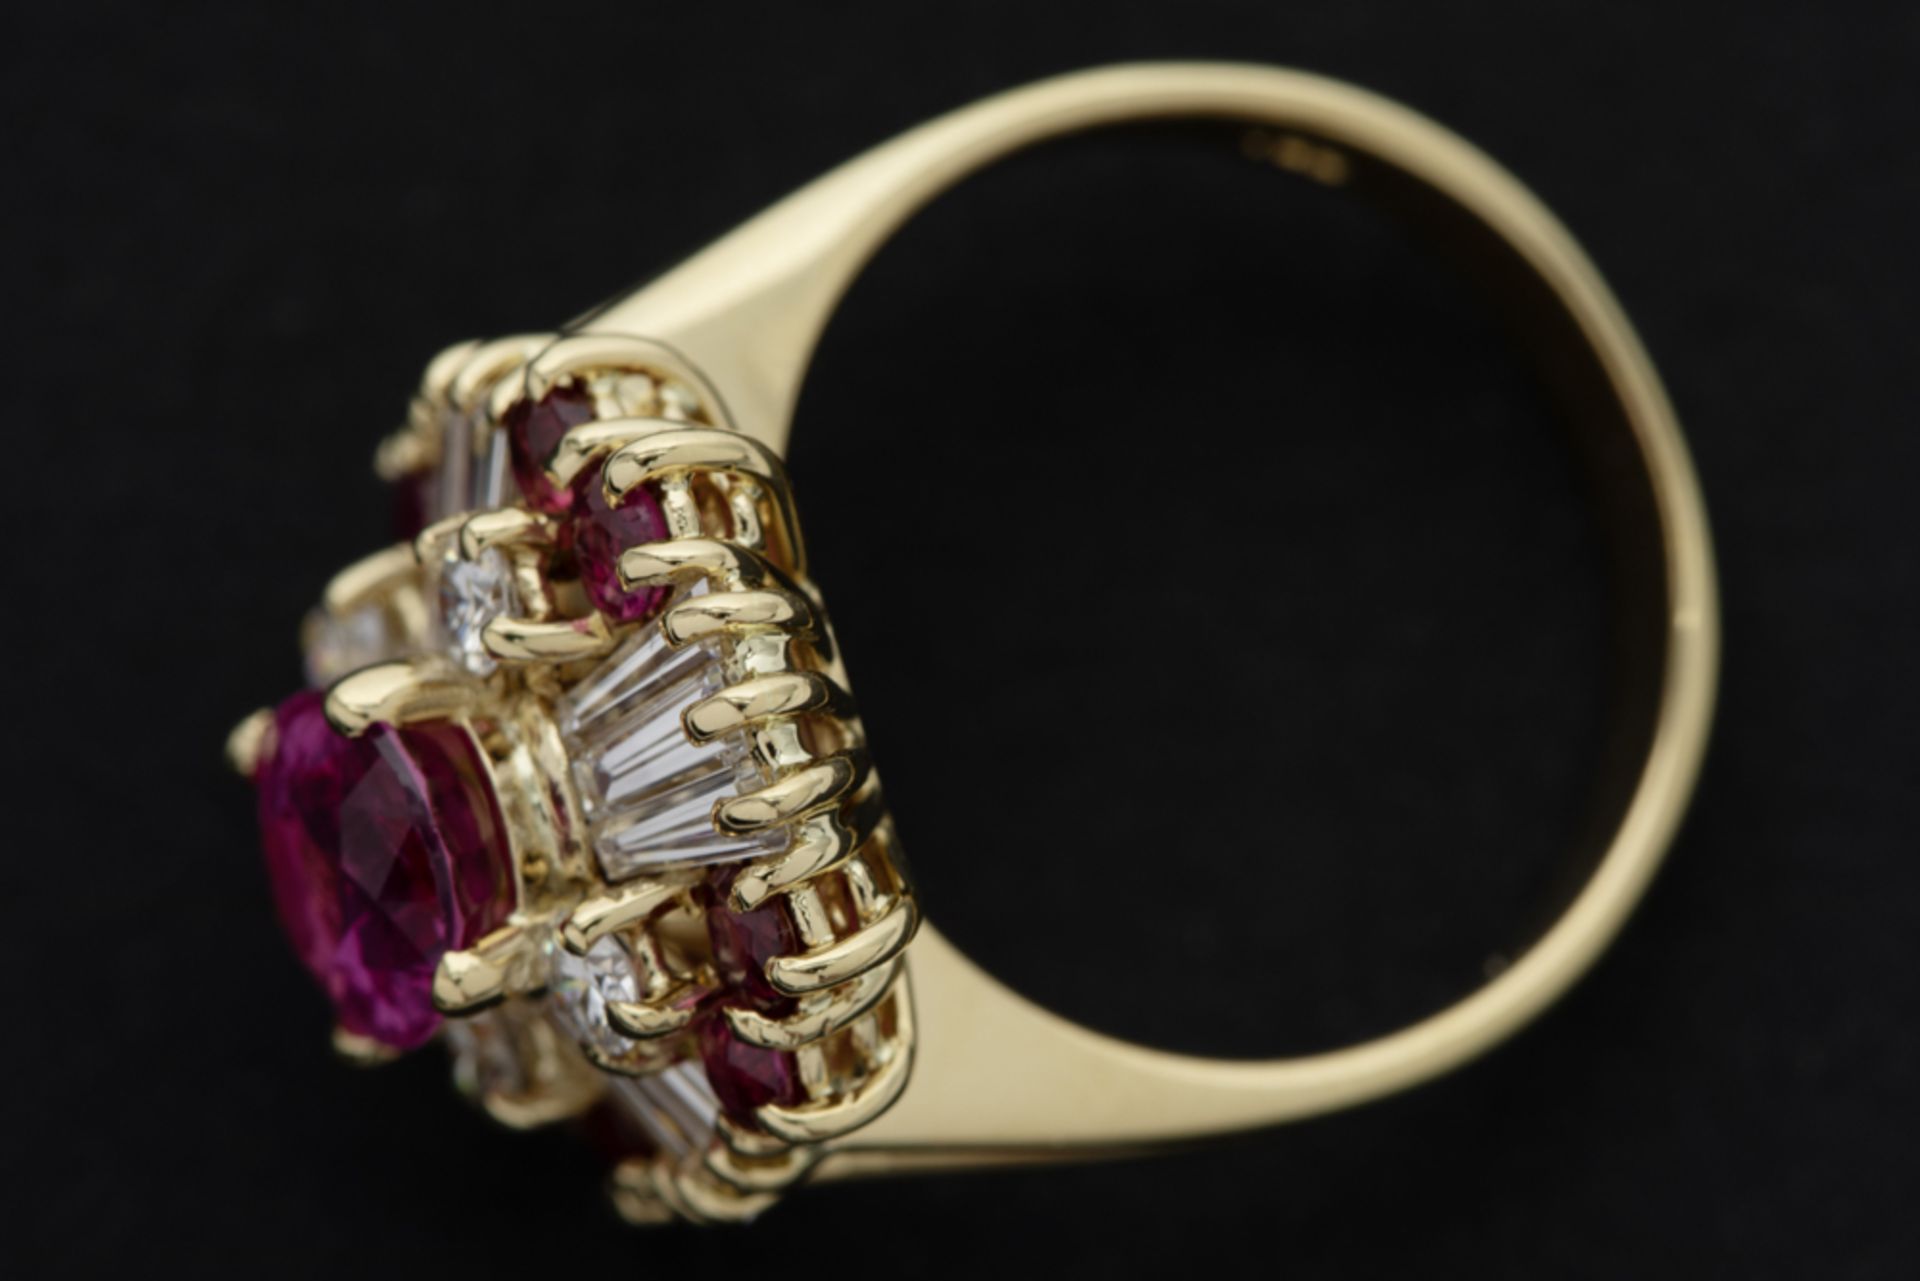 eighties' ring in yellow gold (18 carat) with a 1,61 carat oval non-heated pink sapphire - Image 2 of 3